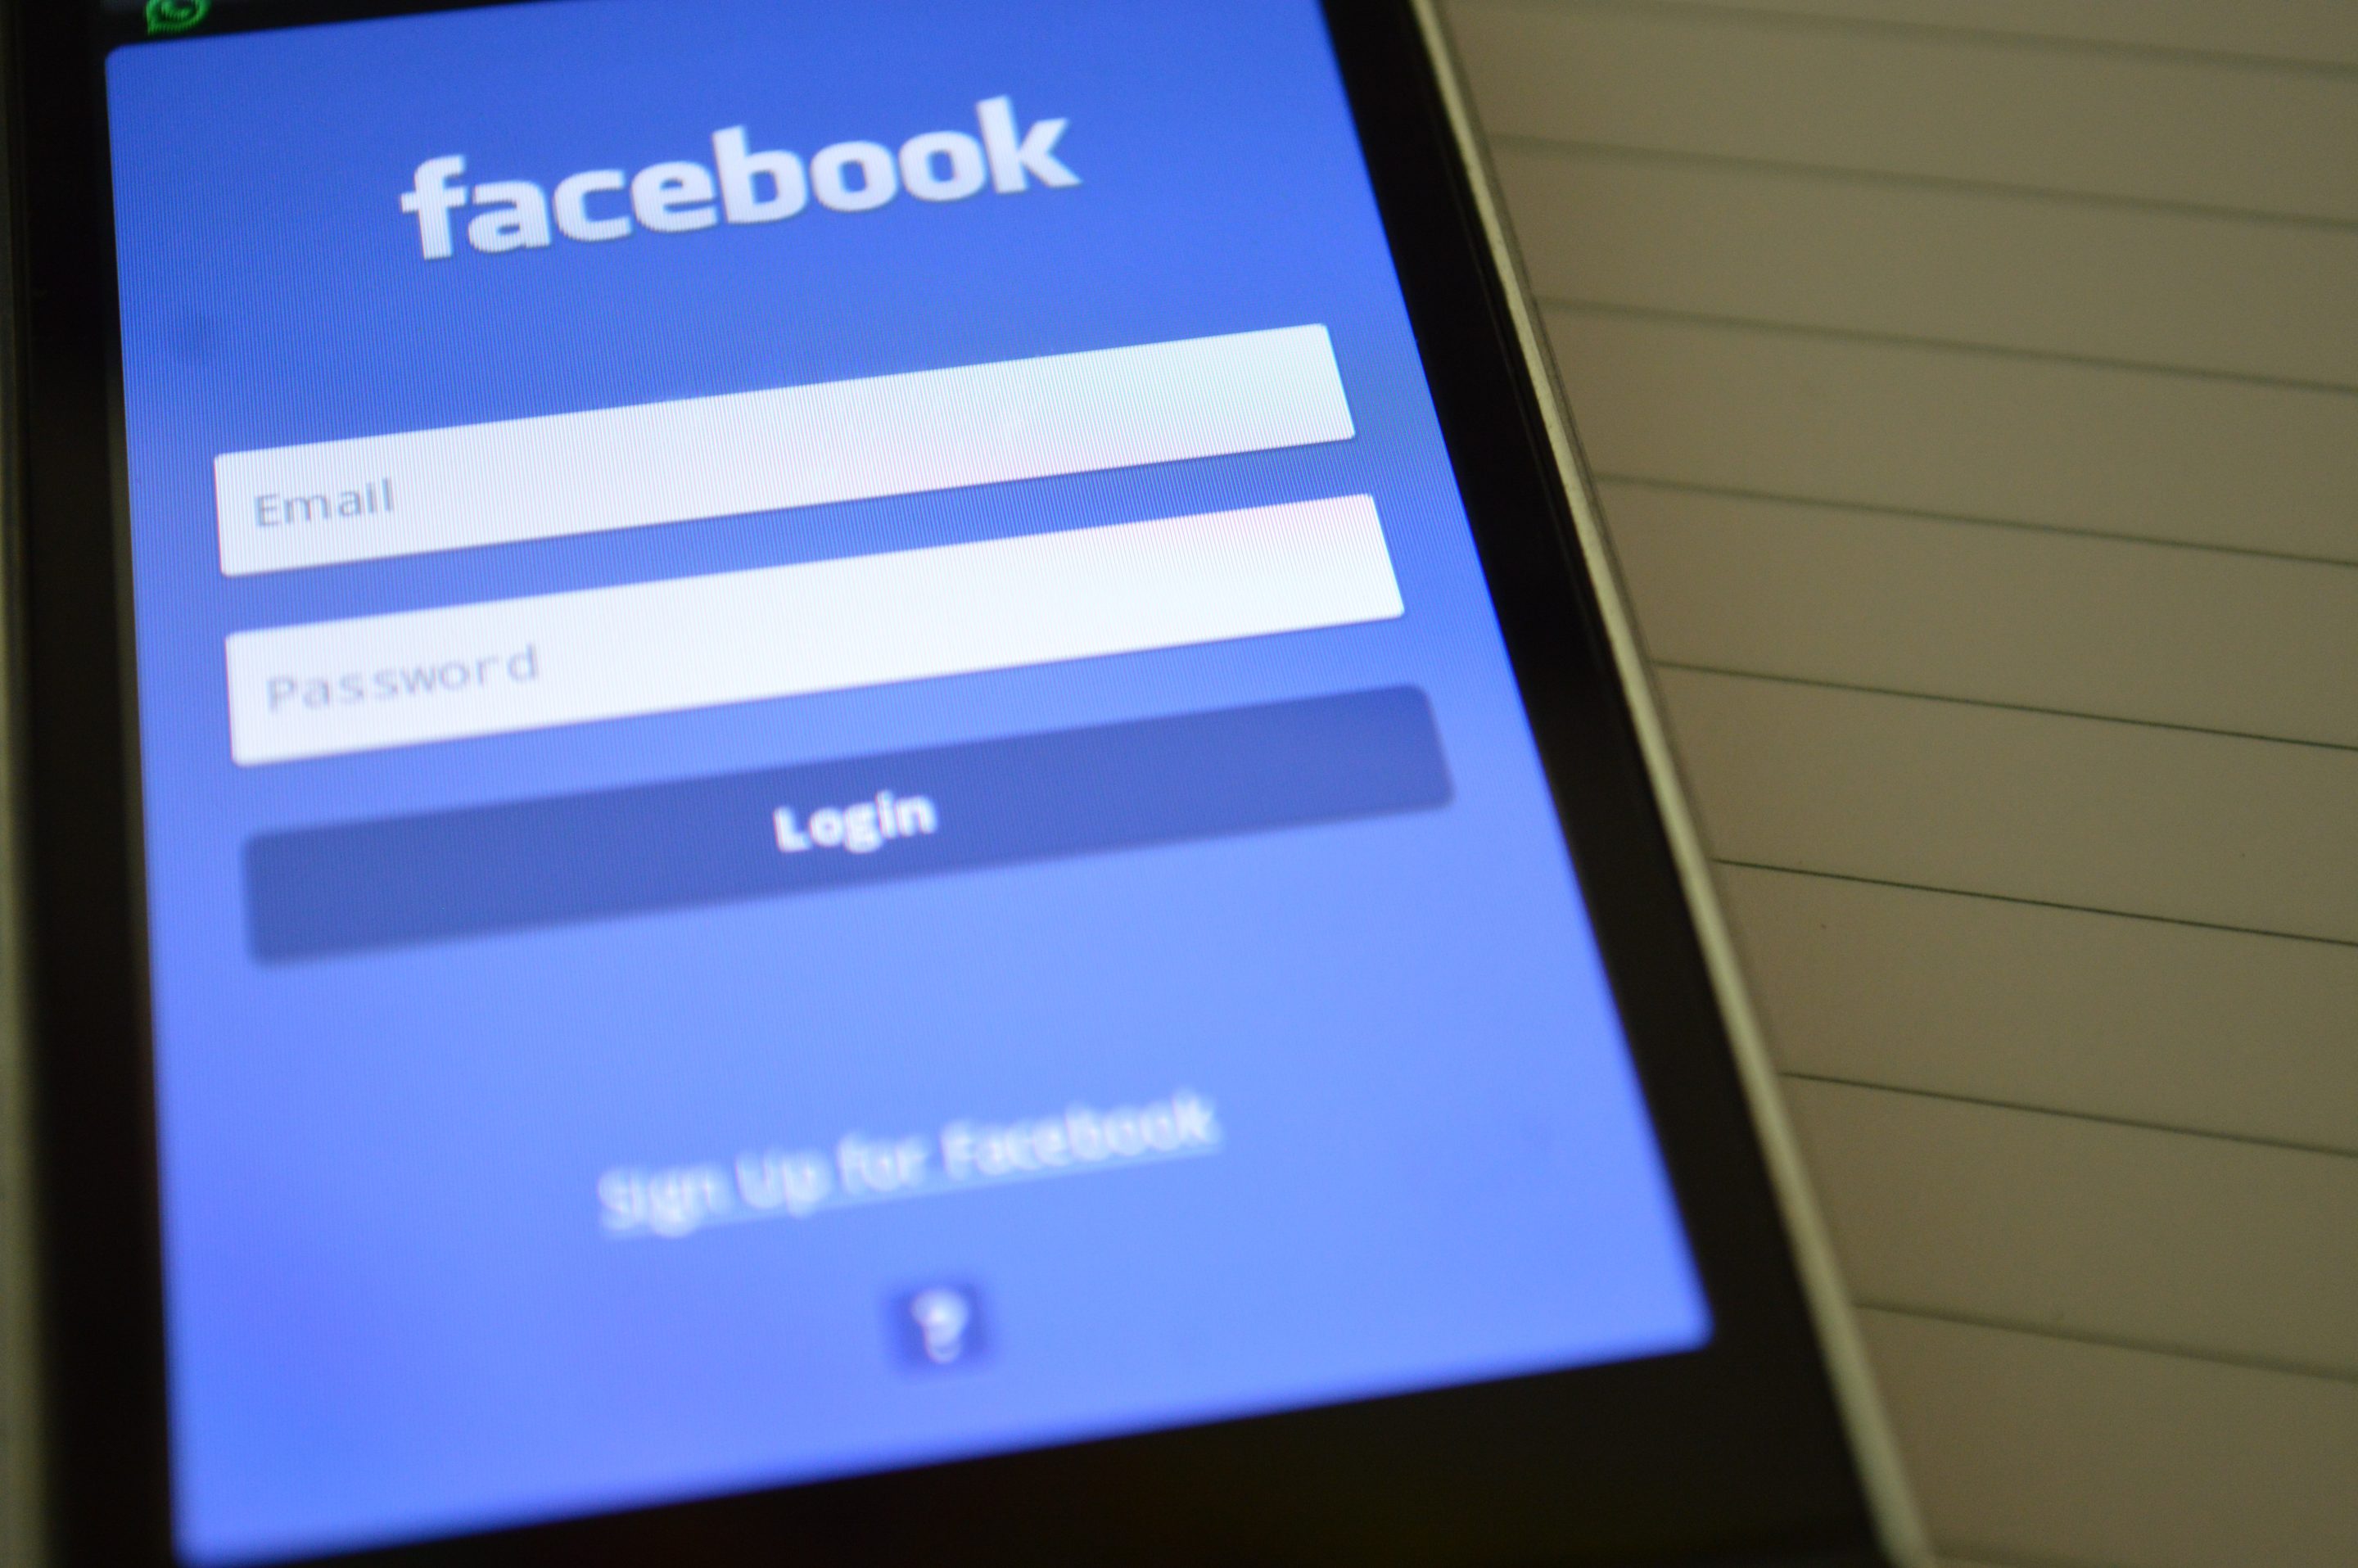 A cell phone is displaying a Facebook login screen, targeting the ideal audience for Facebook advertising.